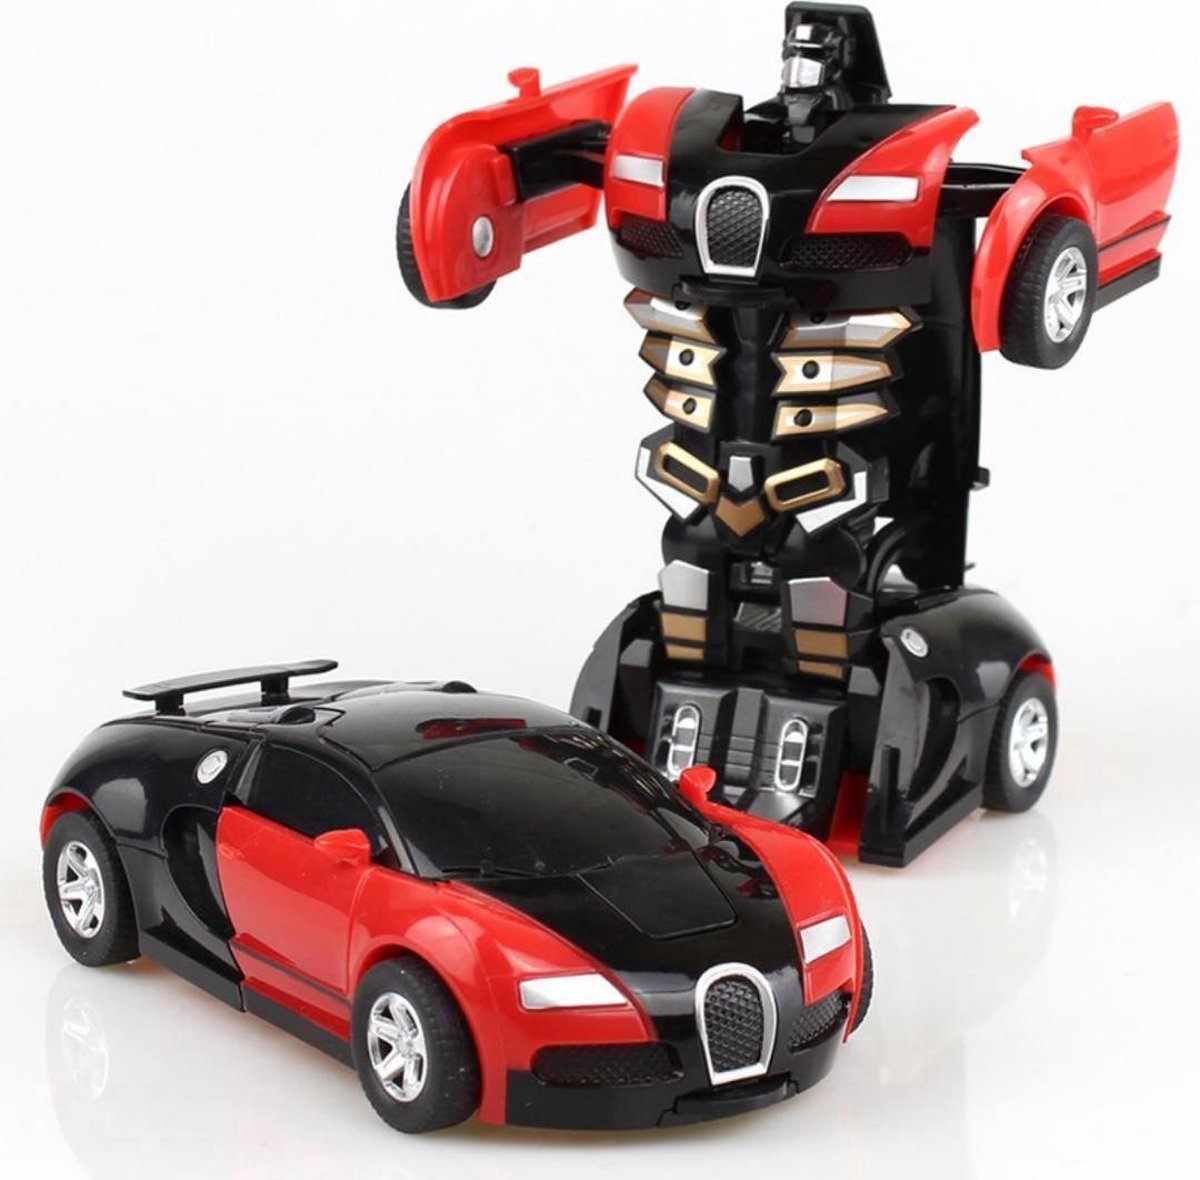 Transformers - Transformers Speelgoed - 2 in 1 Transformers - Robot Auto - Cadeautip - Geen personage